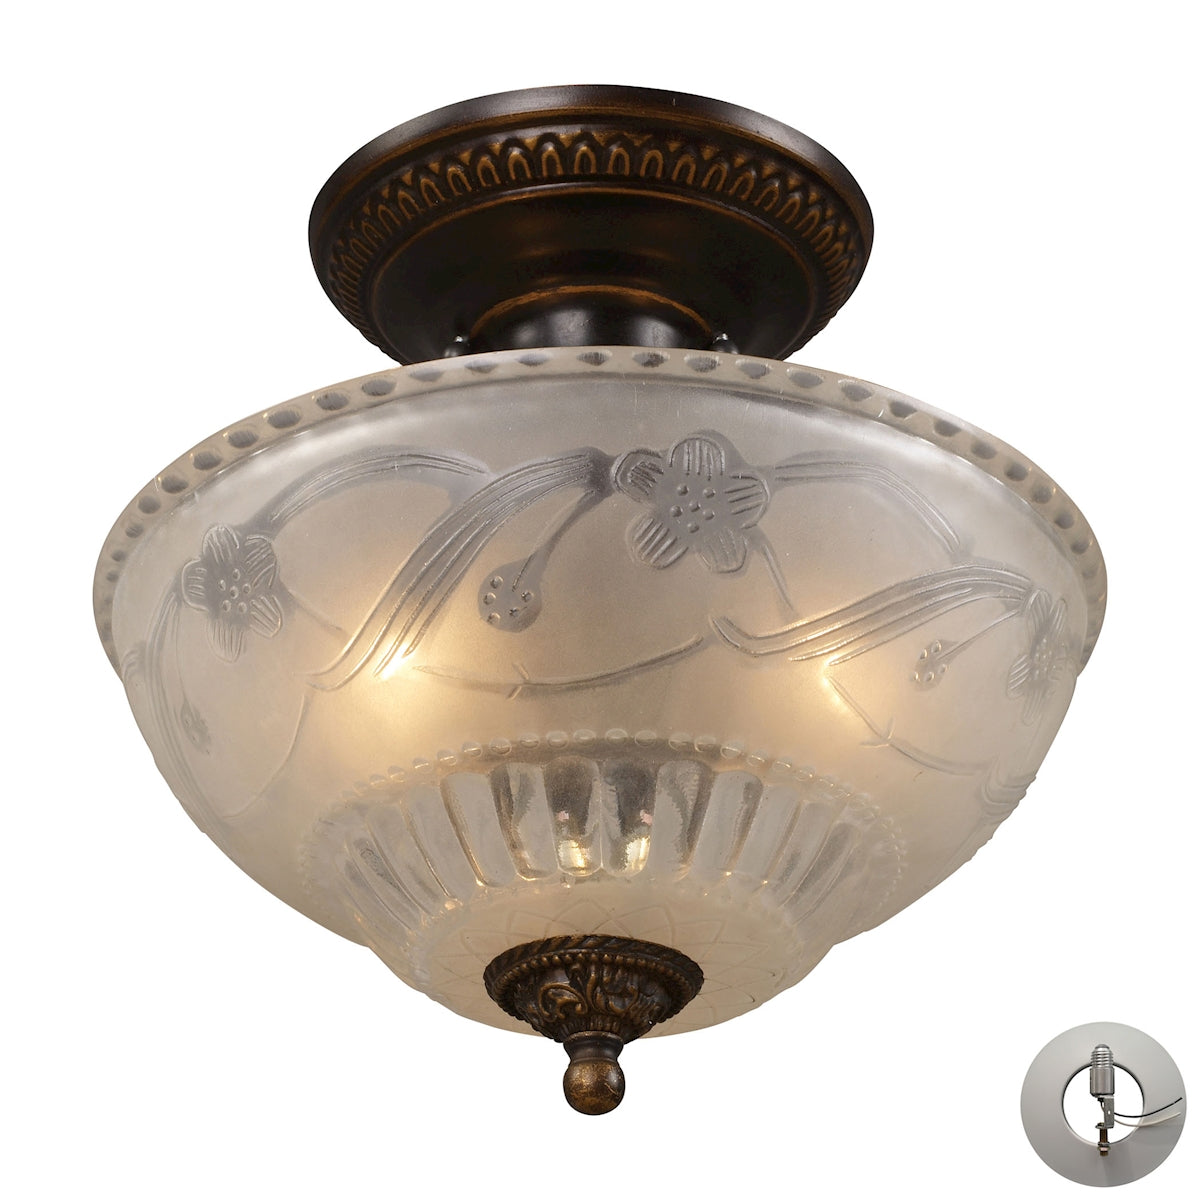 Restoration 3-Light Semi Flush in Golden Bronze with Off-white Glass - Includes Adapter Kit